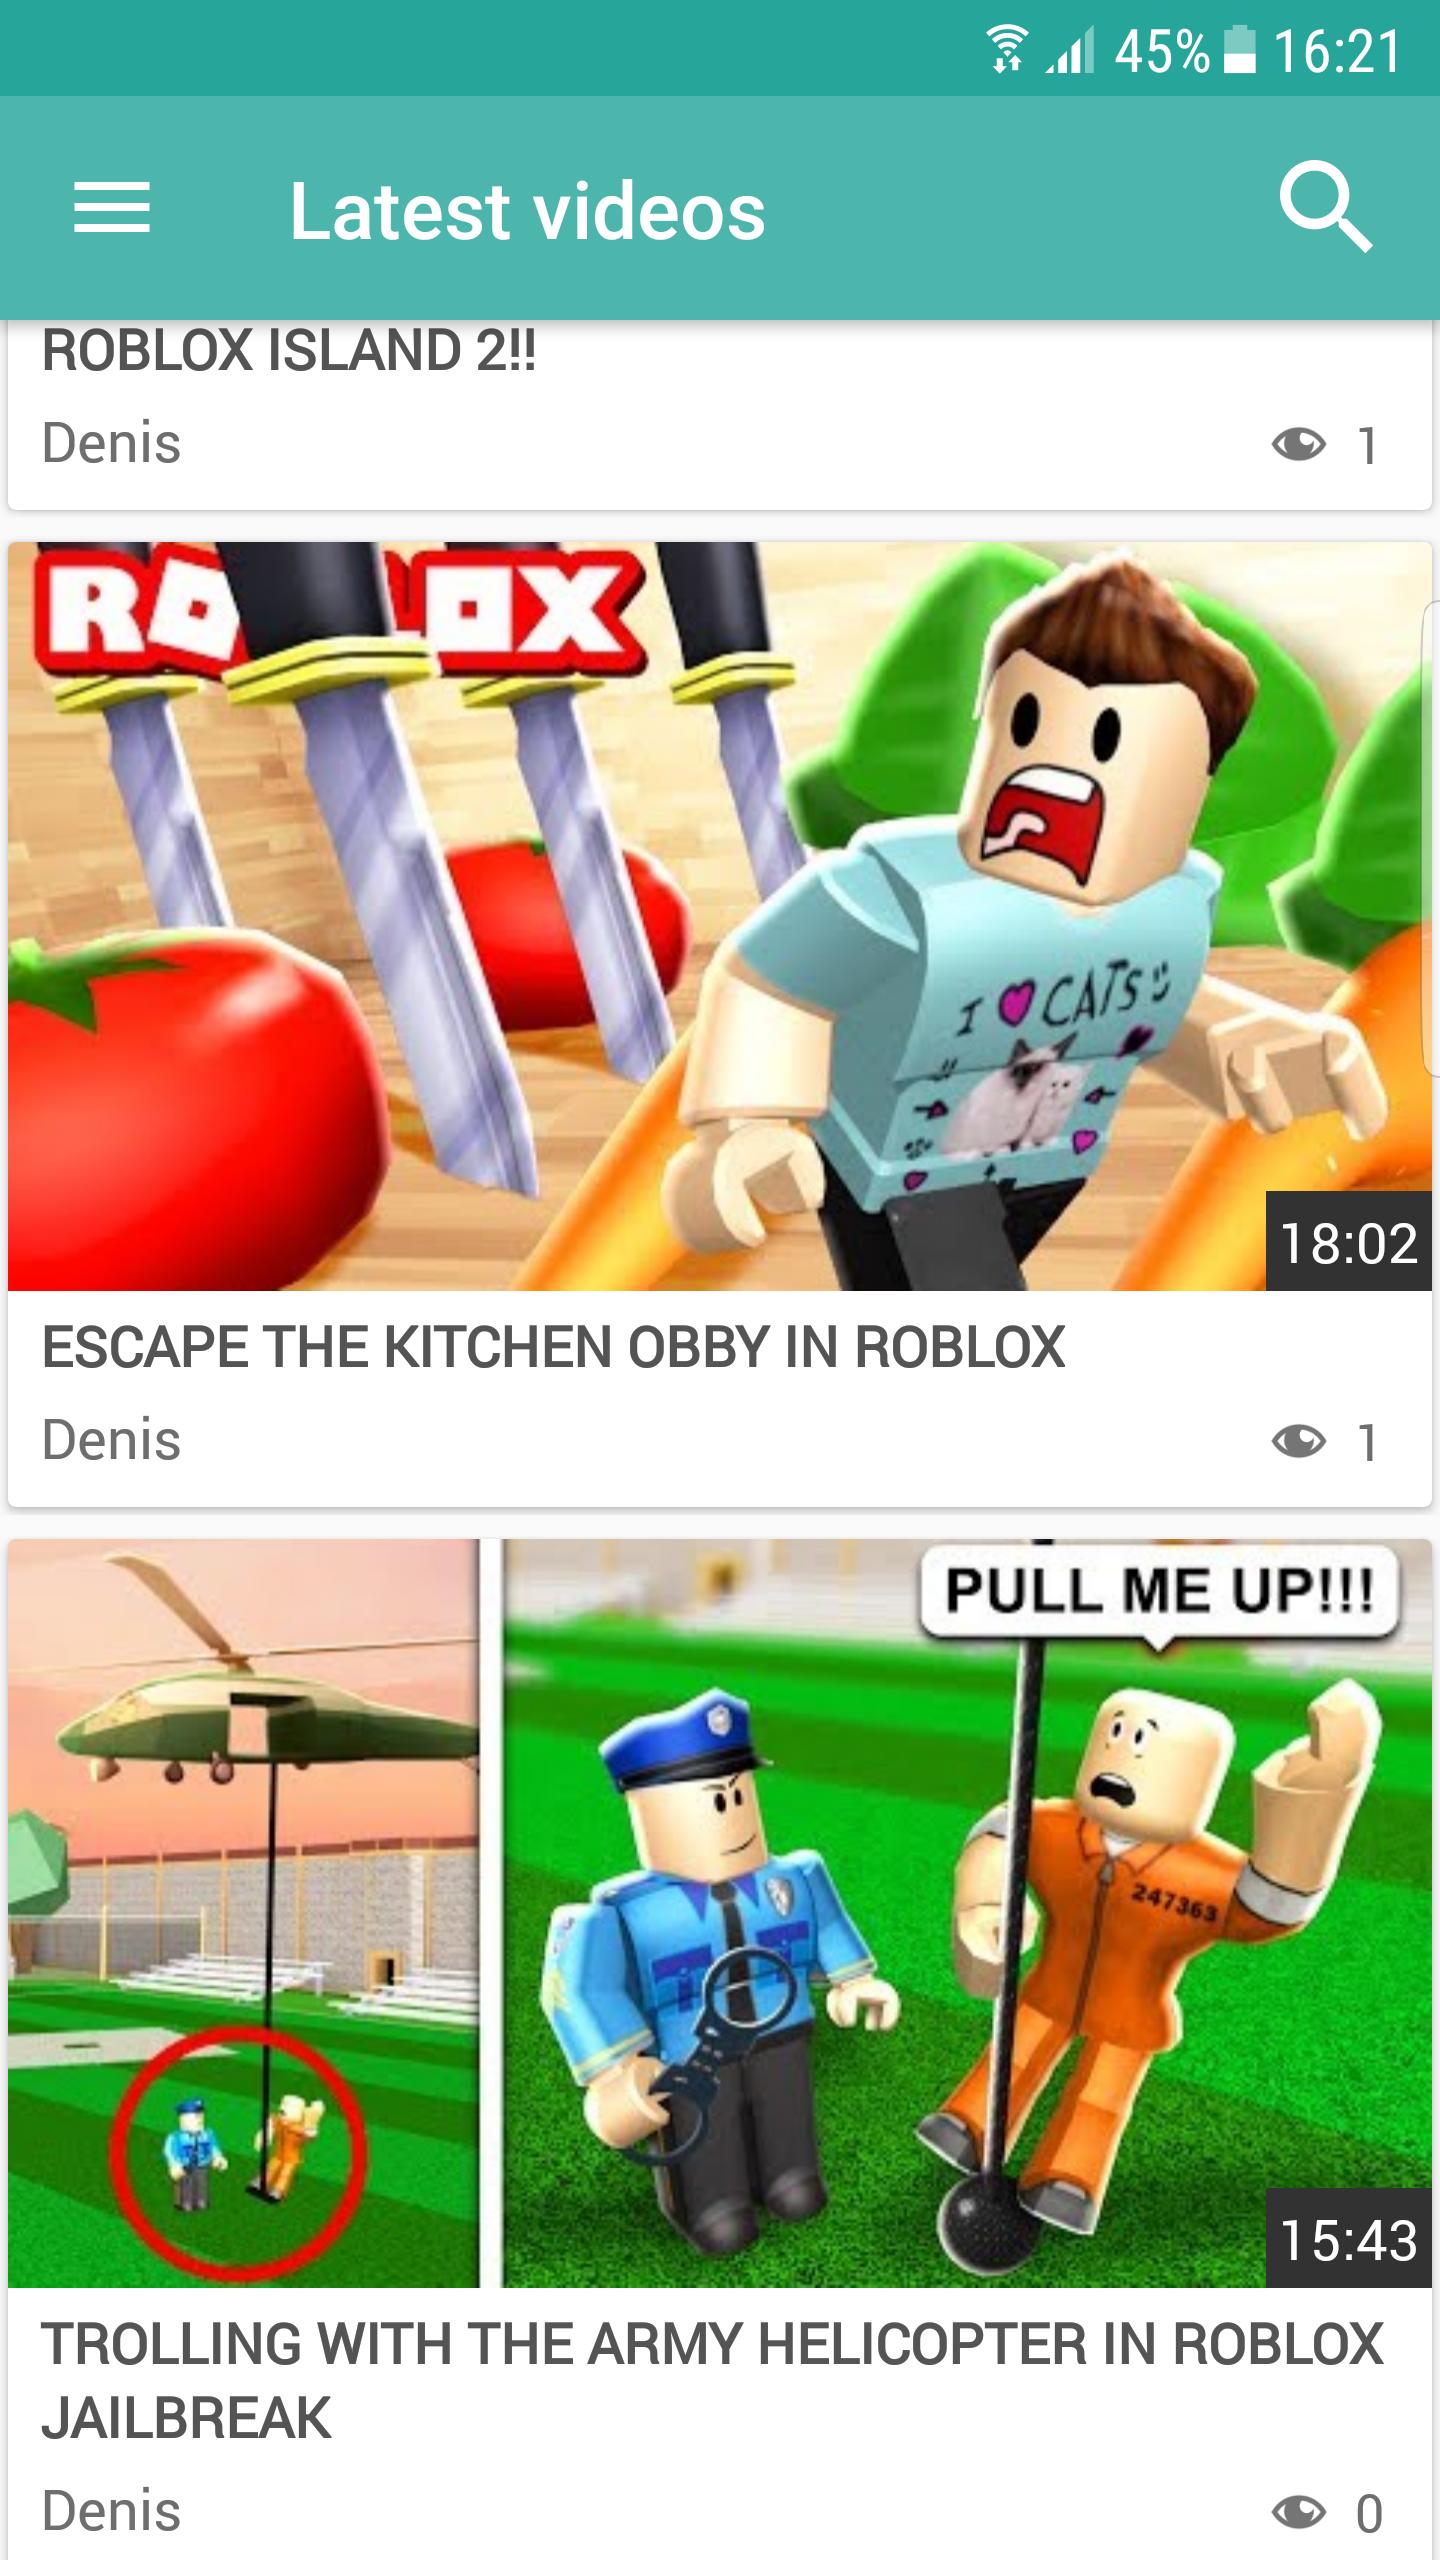 Denis Video For Android Apk Download - what is denis account name on roblox